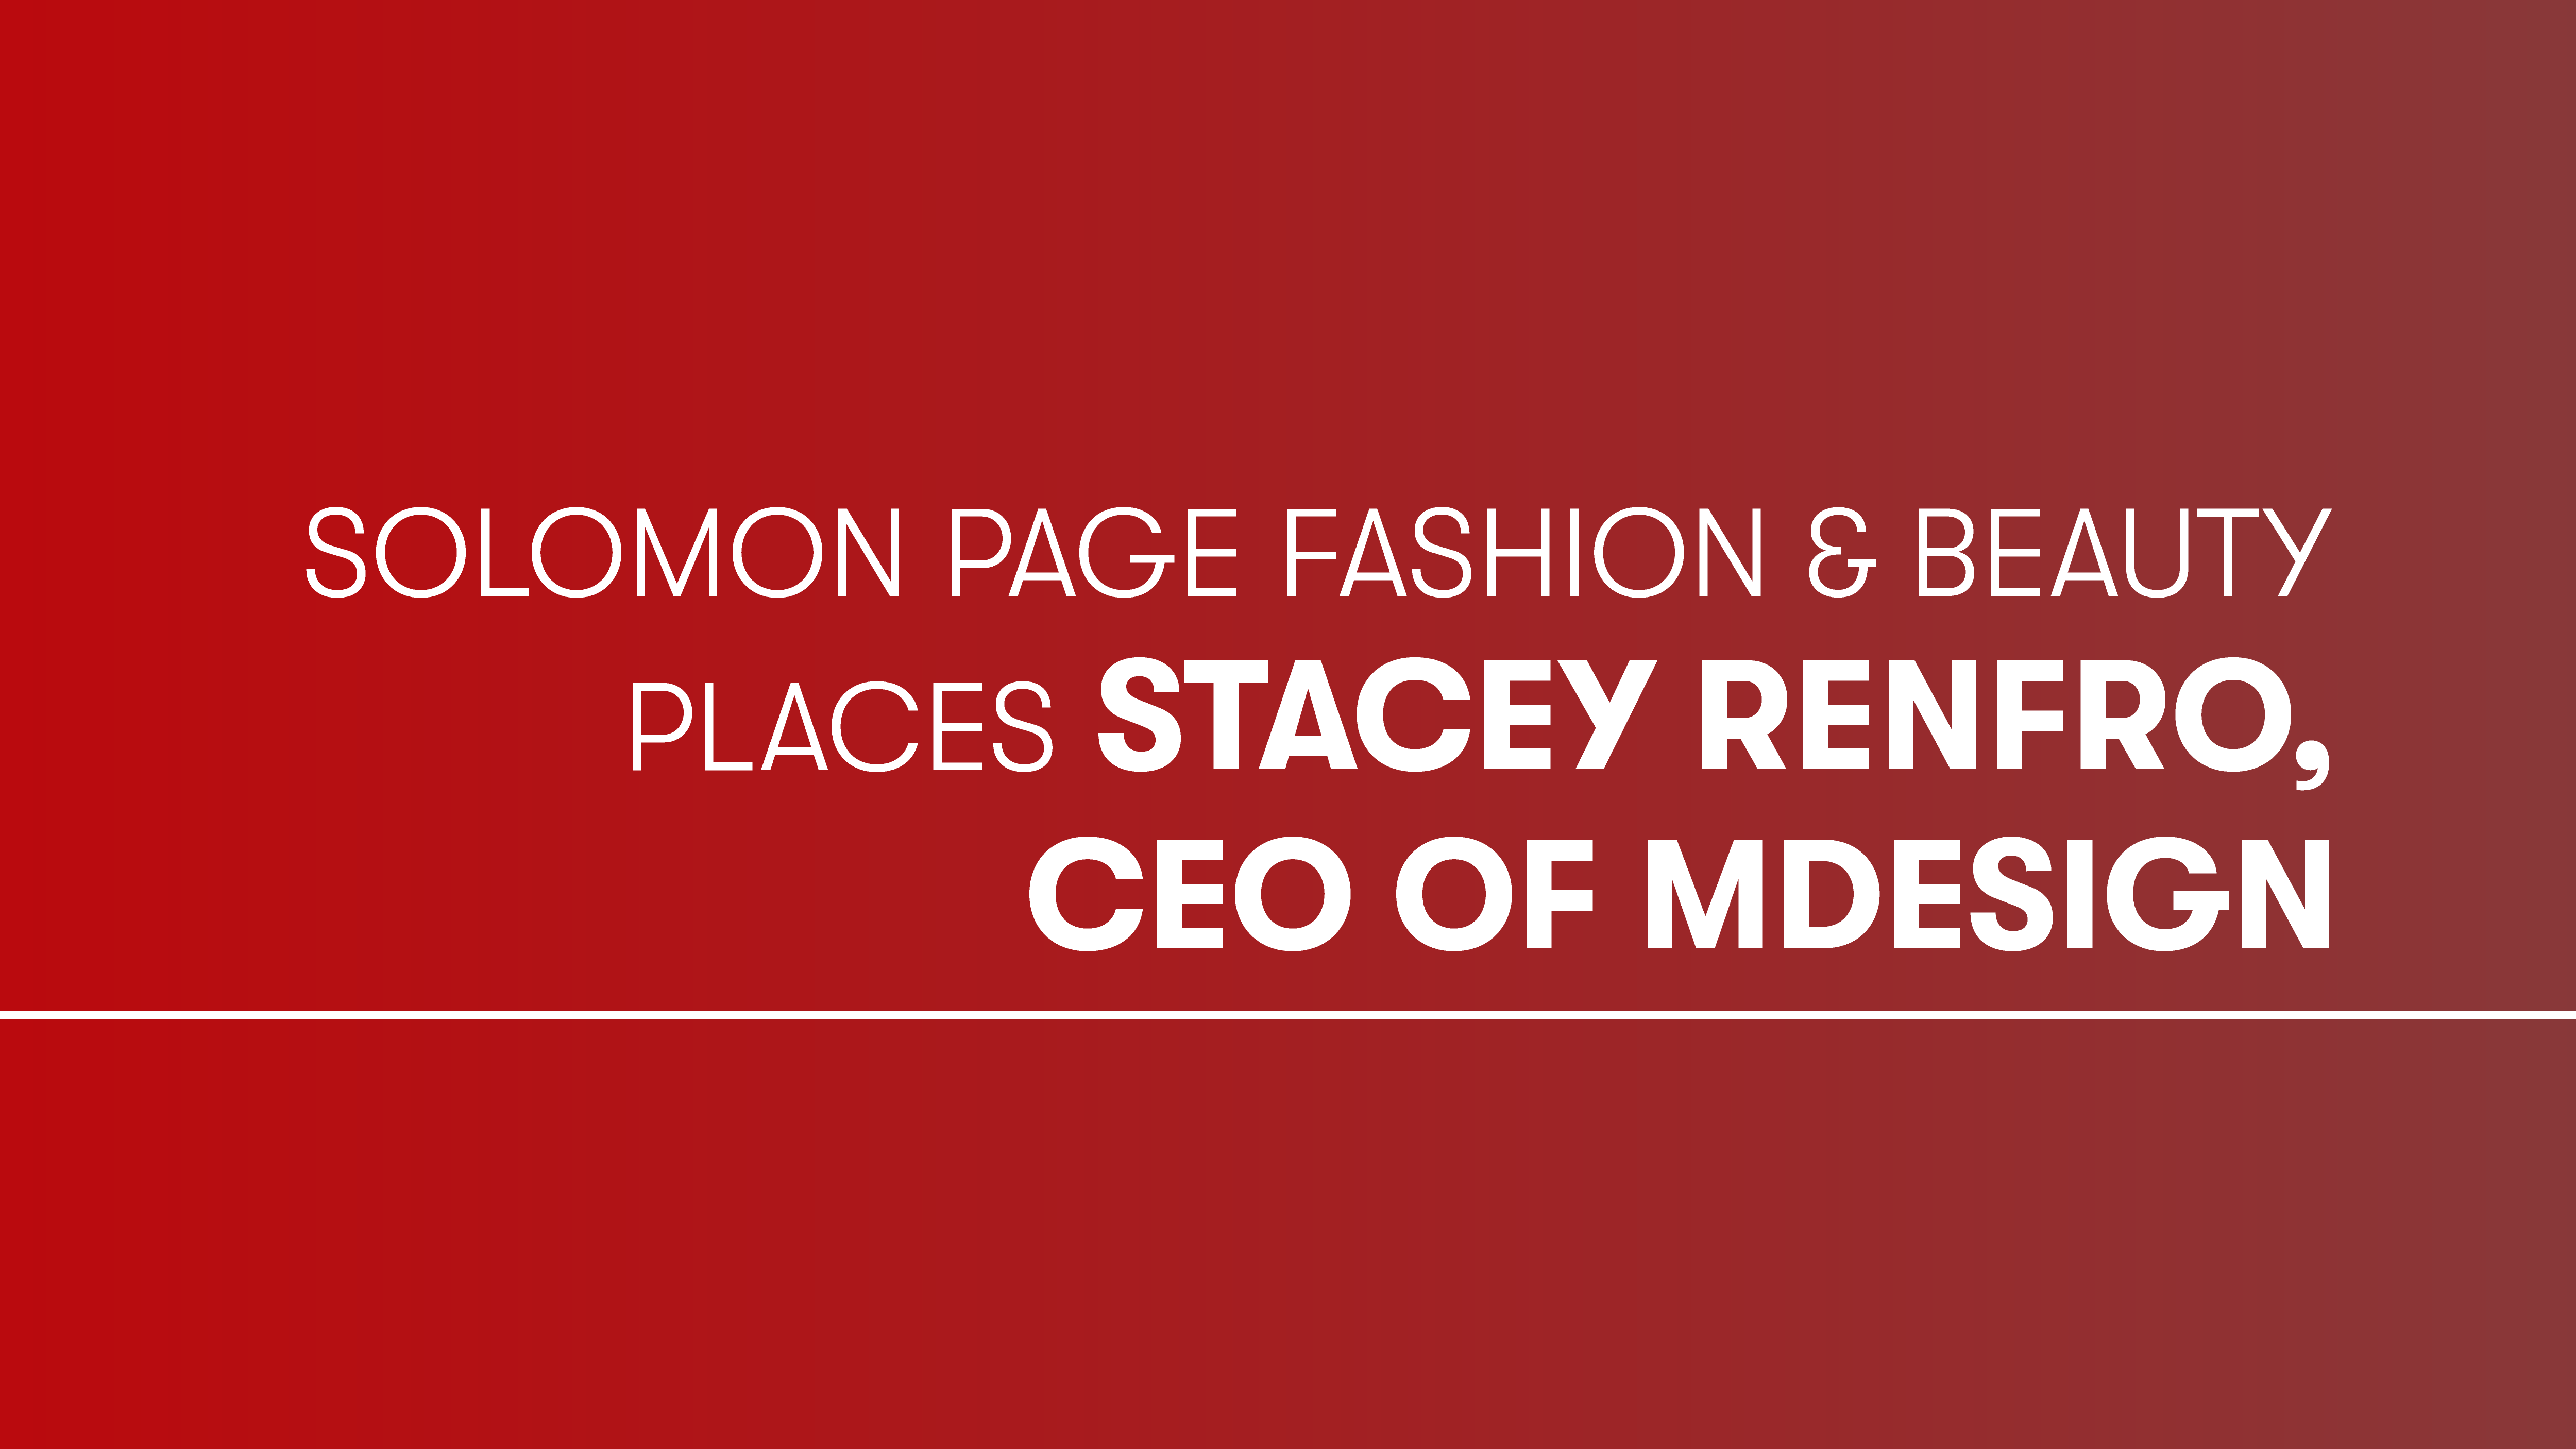 Solomon Page Fashion & Beauty Places Stacey Renfro, CEO of mDesign